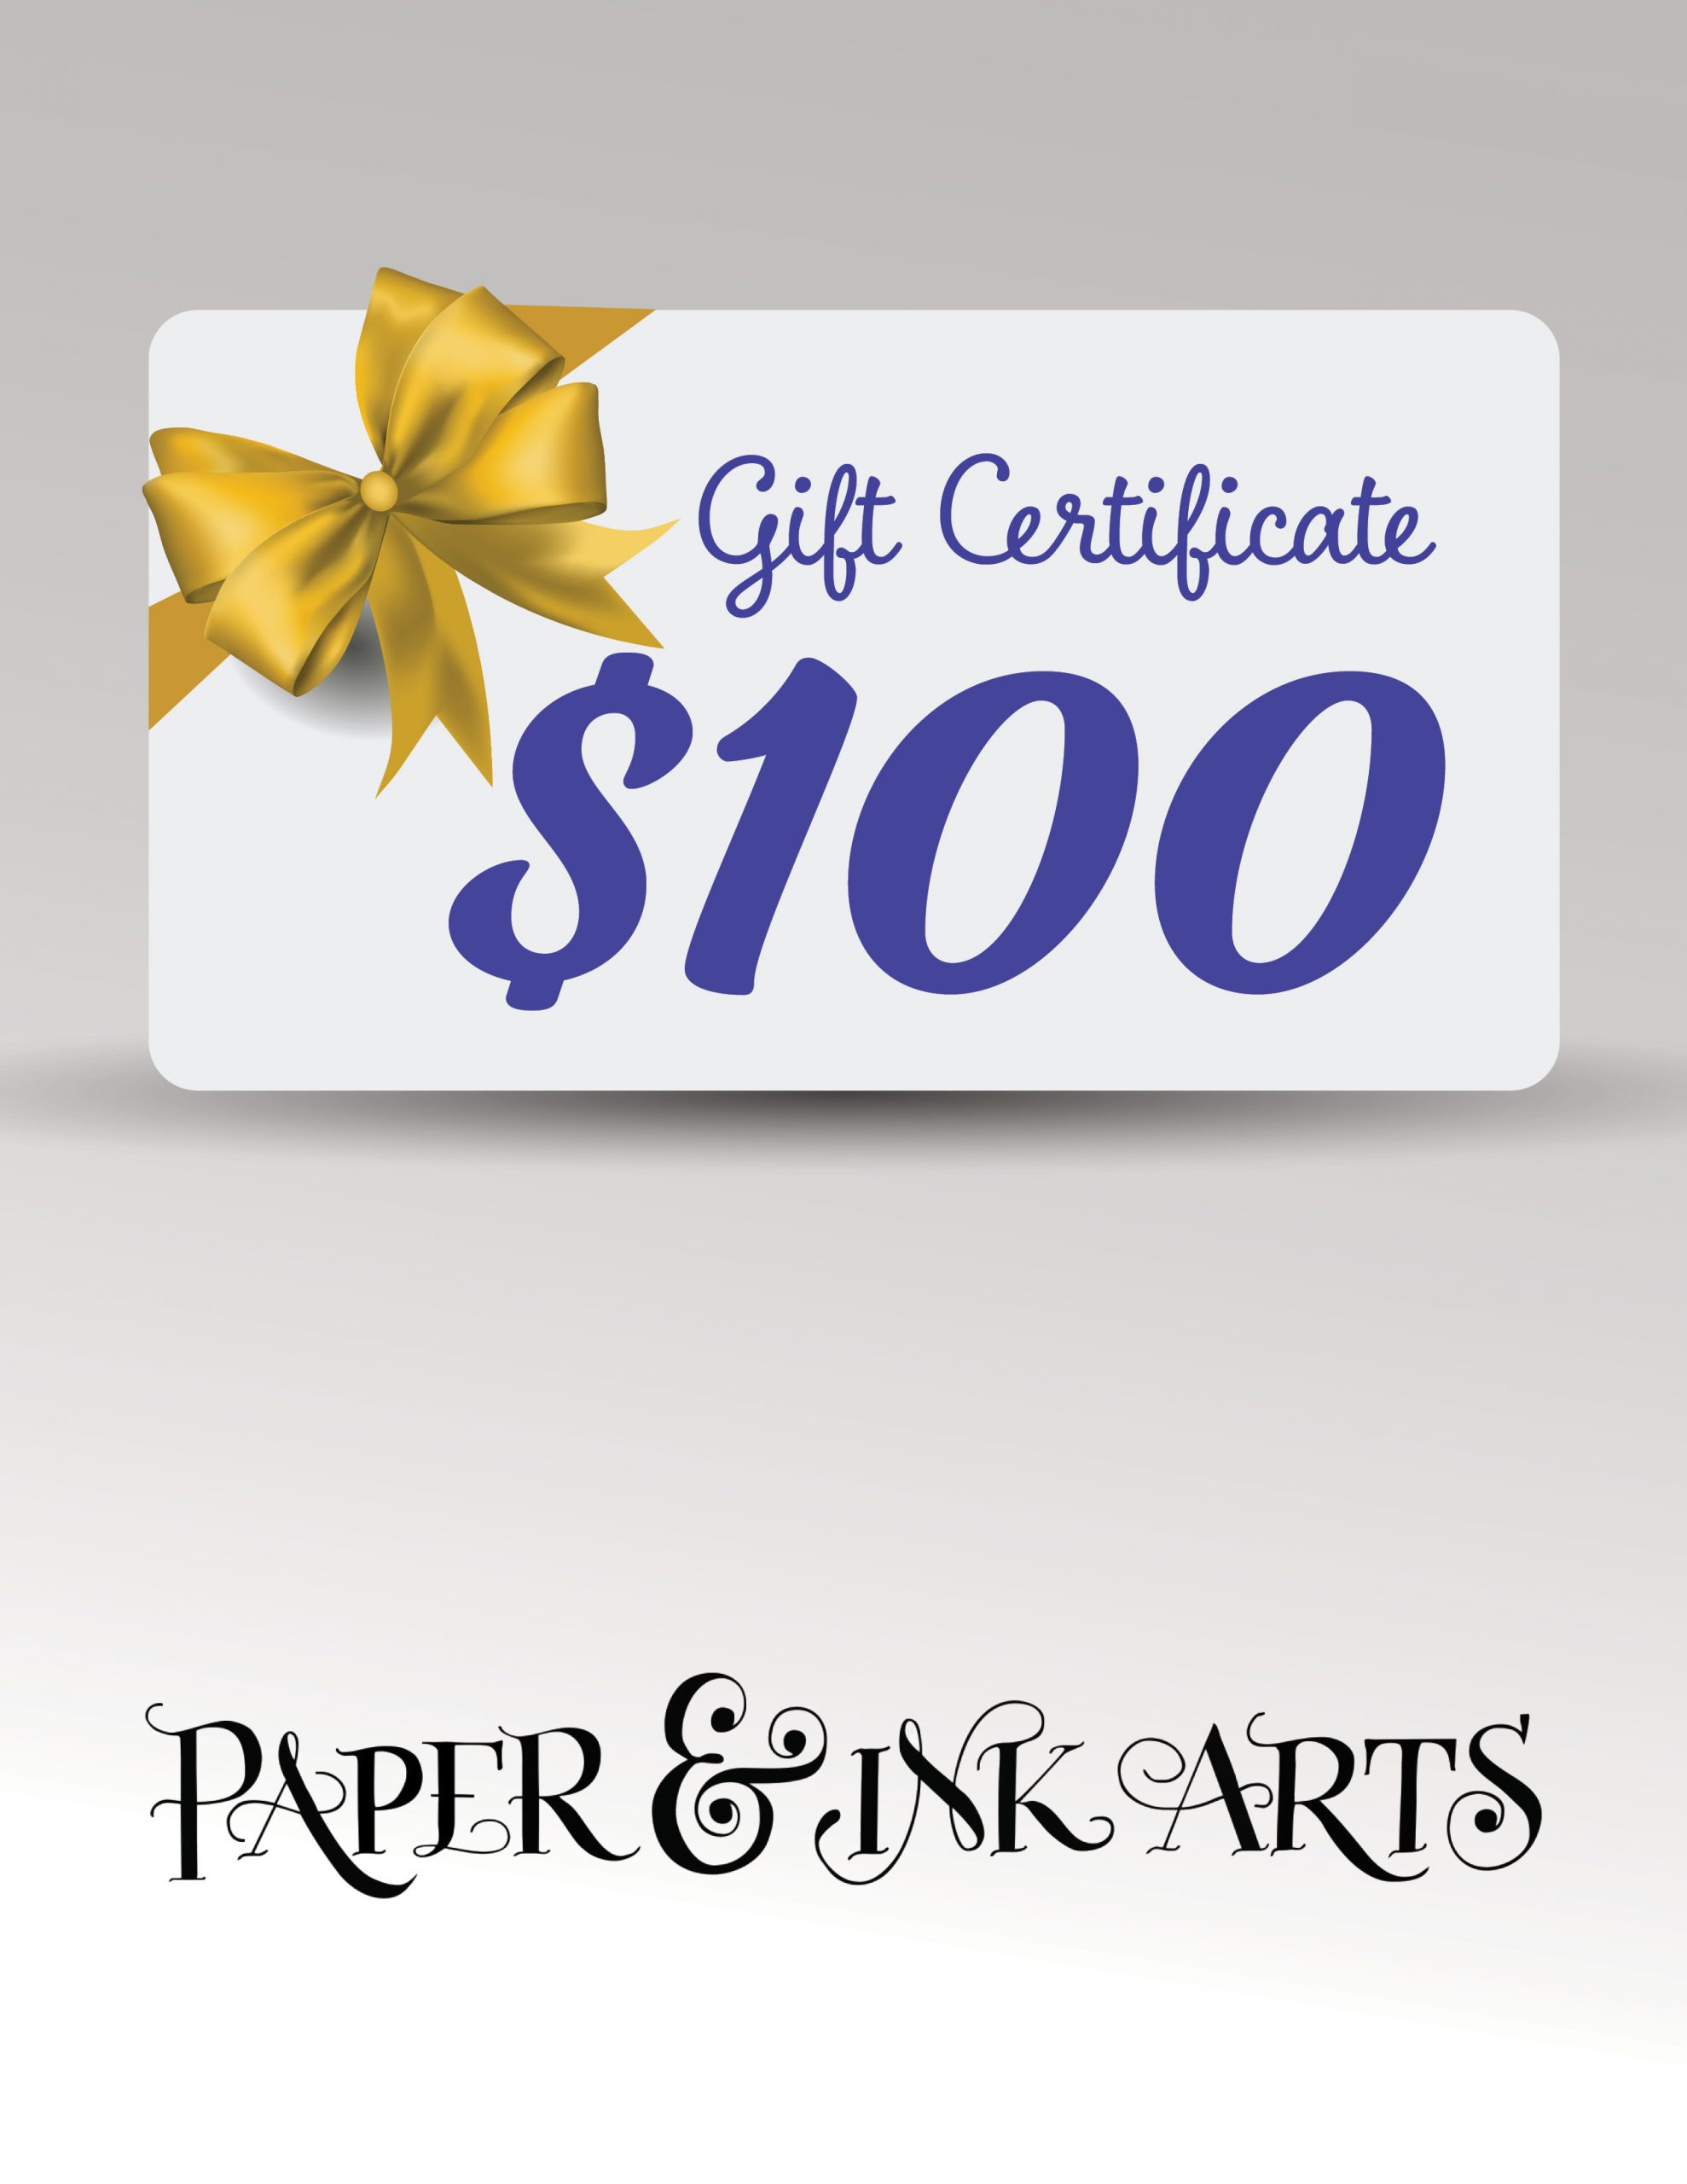 $100 Gift Certificate redeemable at Paper Ink Arts